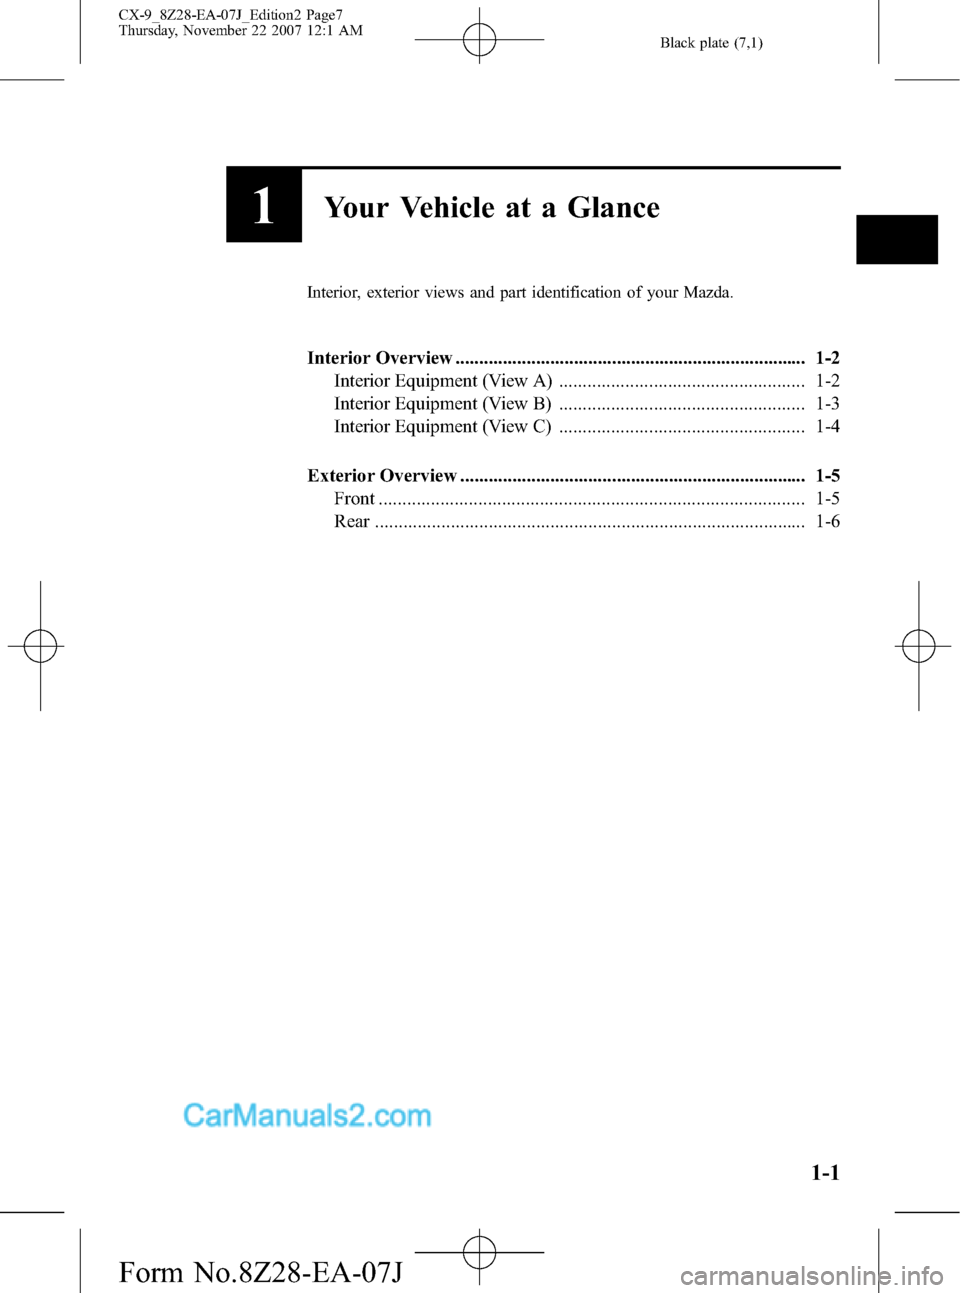 MAZDA MODEL CX-9 2008  Owners Manual (in English) Black plate (7,1)
1Your Vehicle at a Glance
Interior, exterior views and part identification of your Mazda.
Interior Overview ..........................................................................